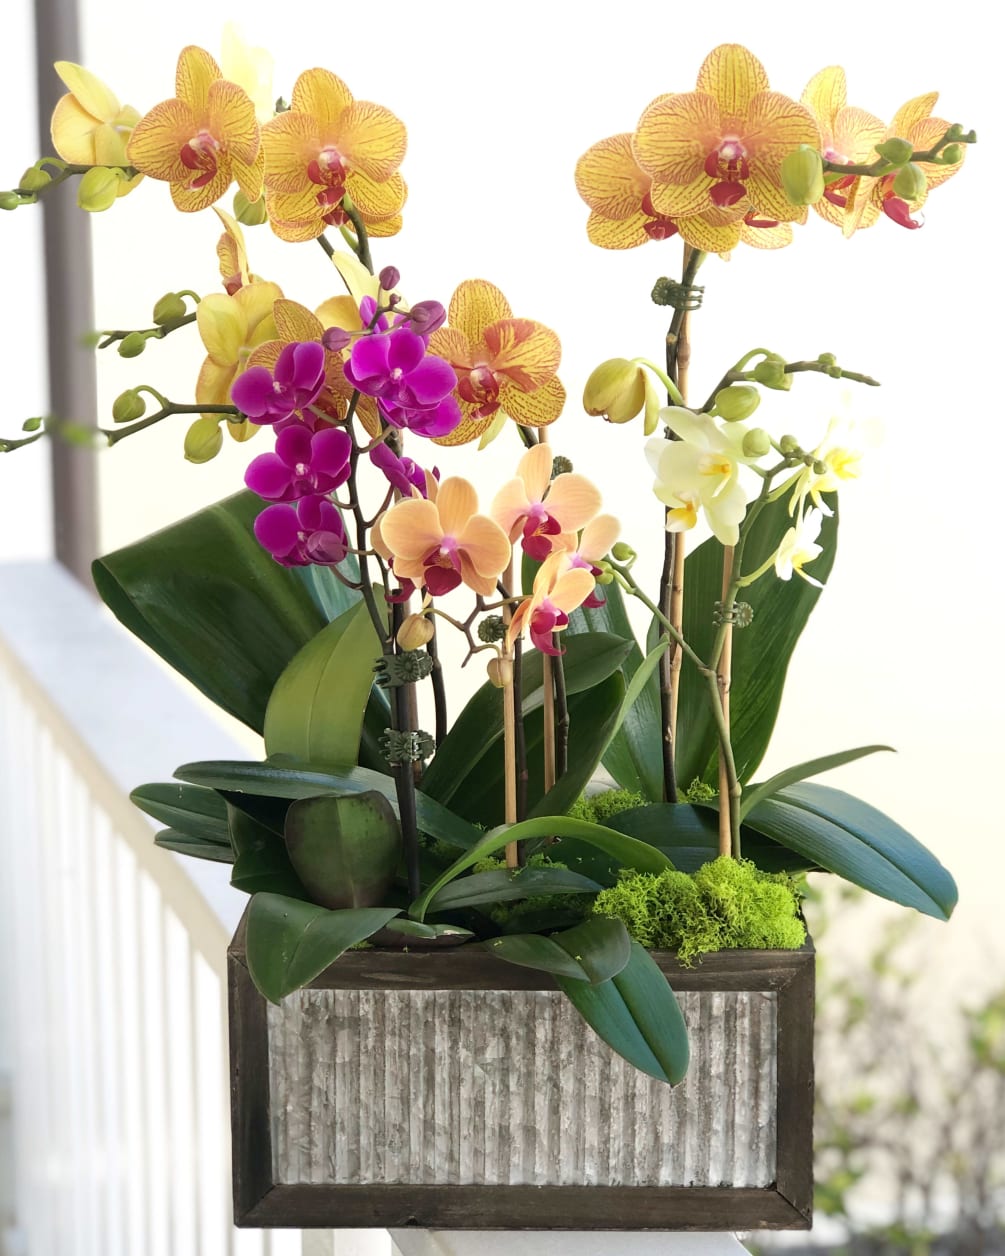 Lovely mix of bright phalaenopsis orchids, 5 to 6 different size plants